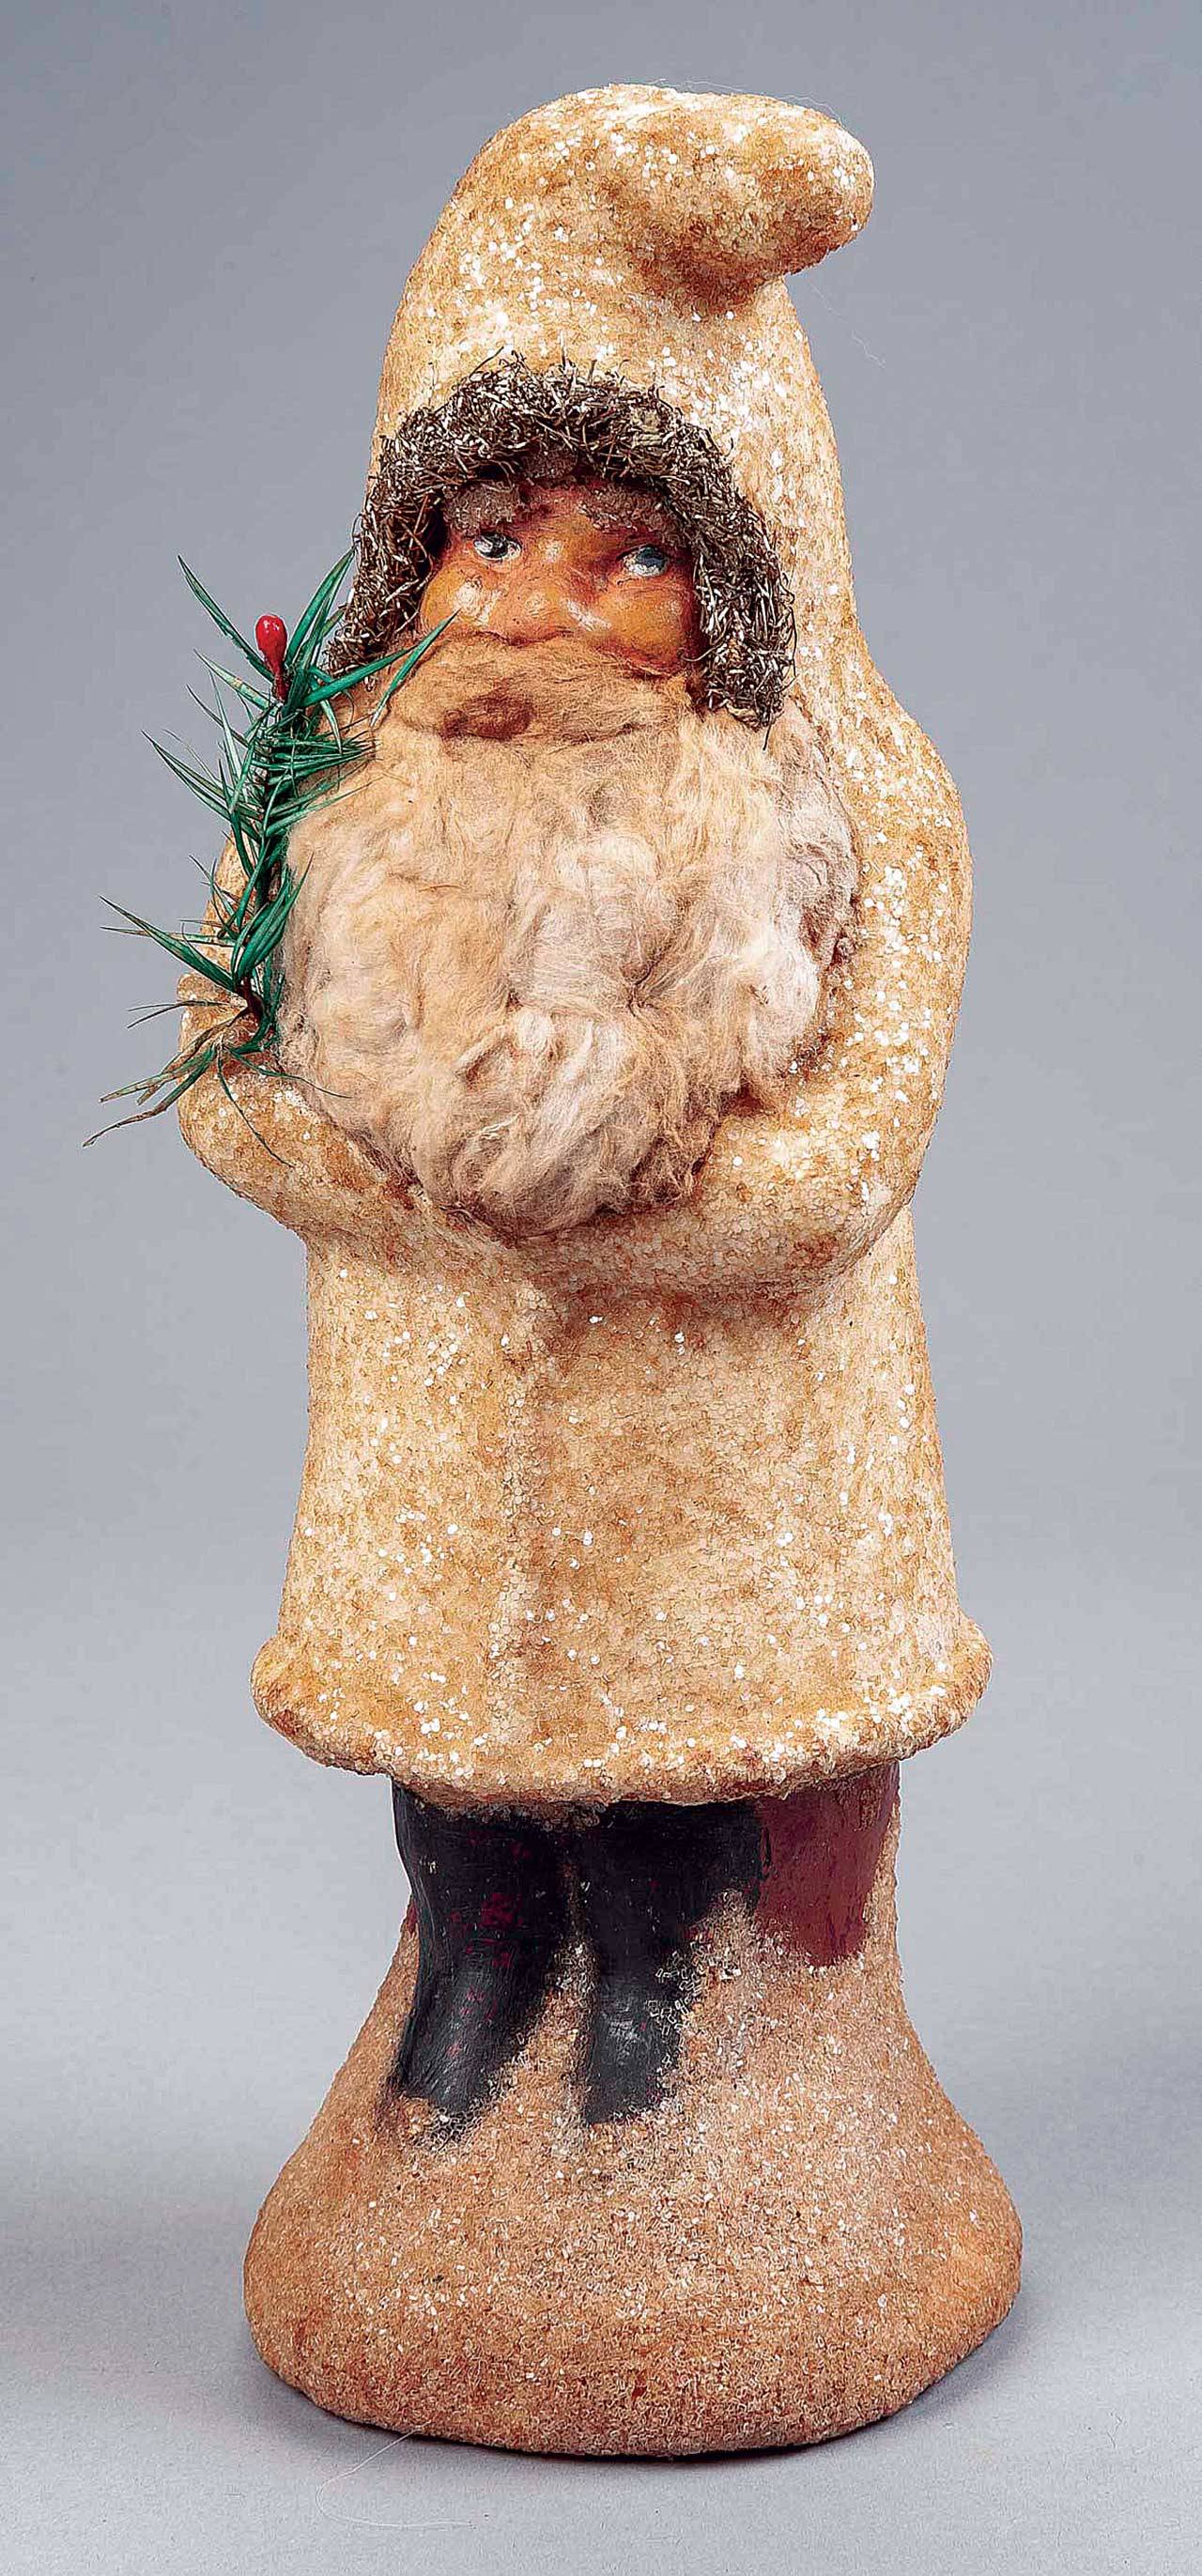 This Christmas figure is Belsnickel, a 19th-century German figure, not our modern Santa Claus. The German character looked for bad children to punish, not good children to reward with gifts. The scary figure is much less popular than Santa and sold for $168. (Cowles Syndicate Inc.)